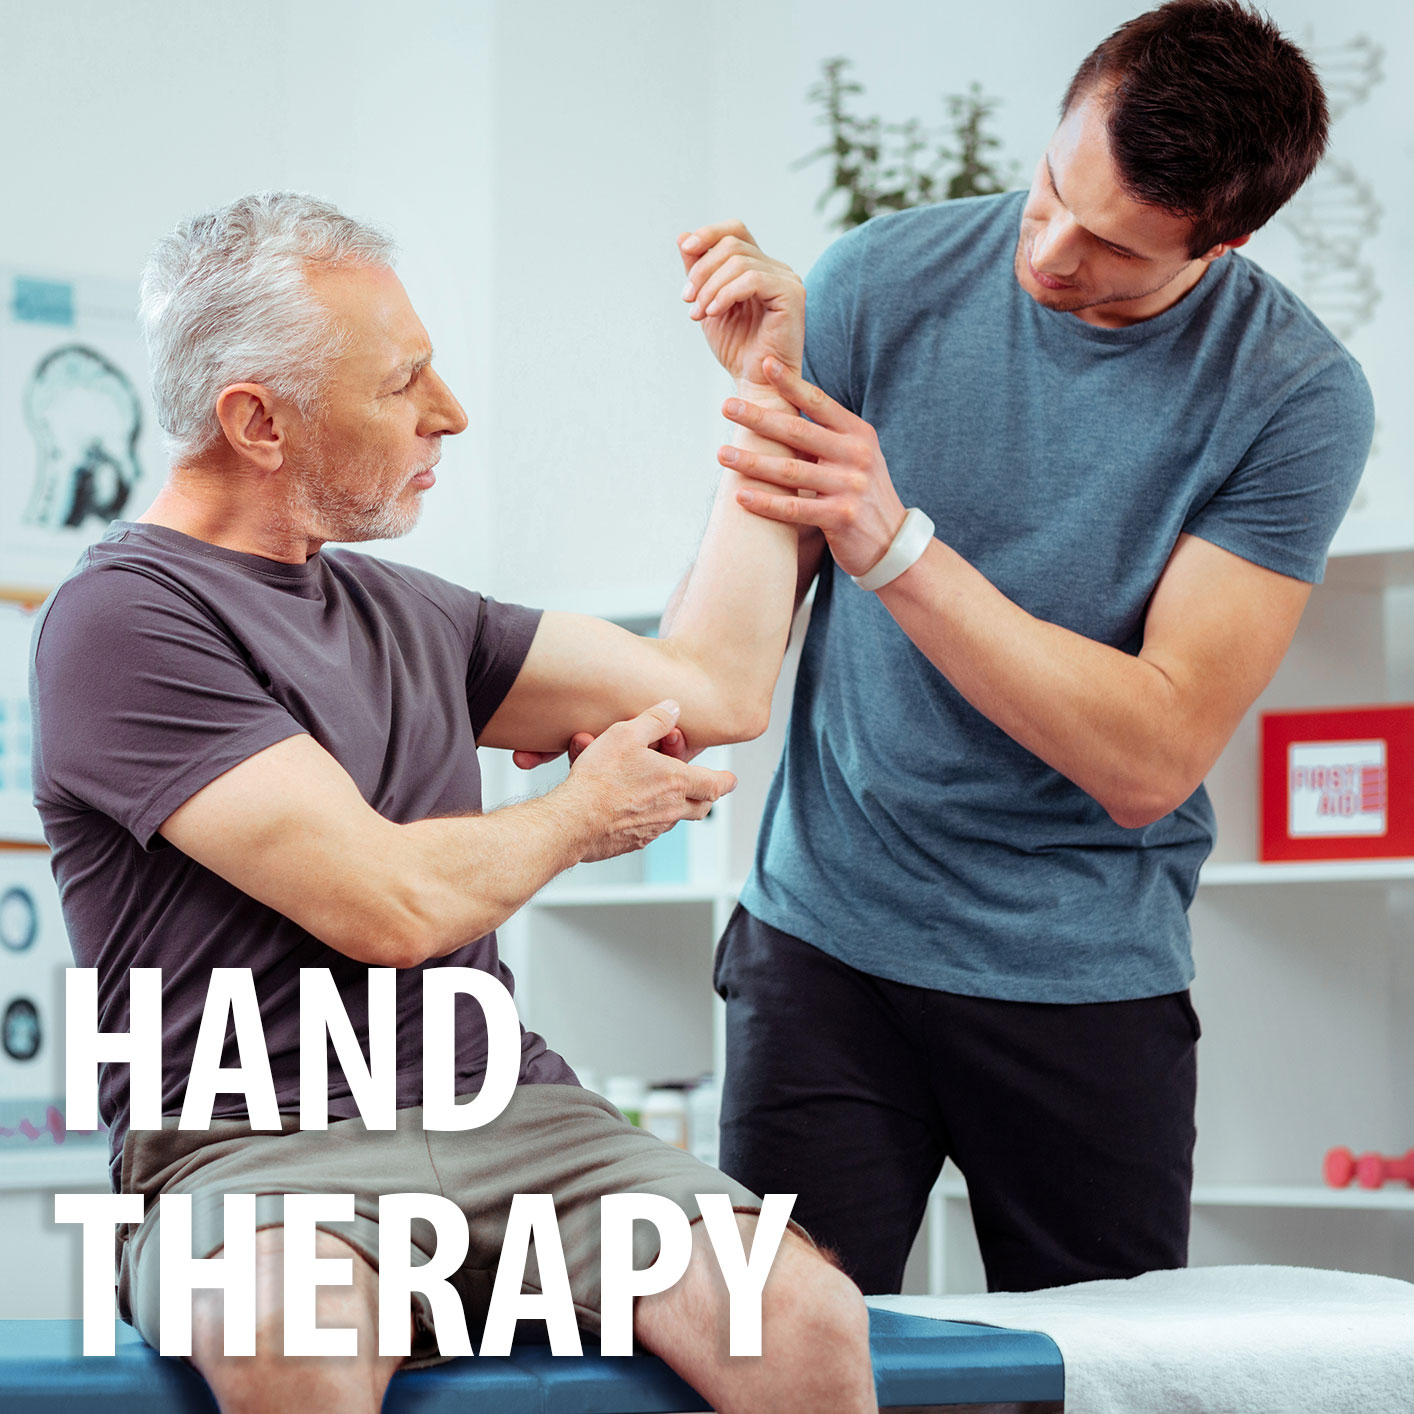 Patient receiving hand therapy from physical therapist